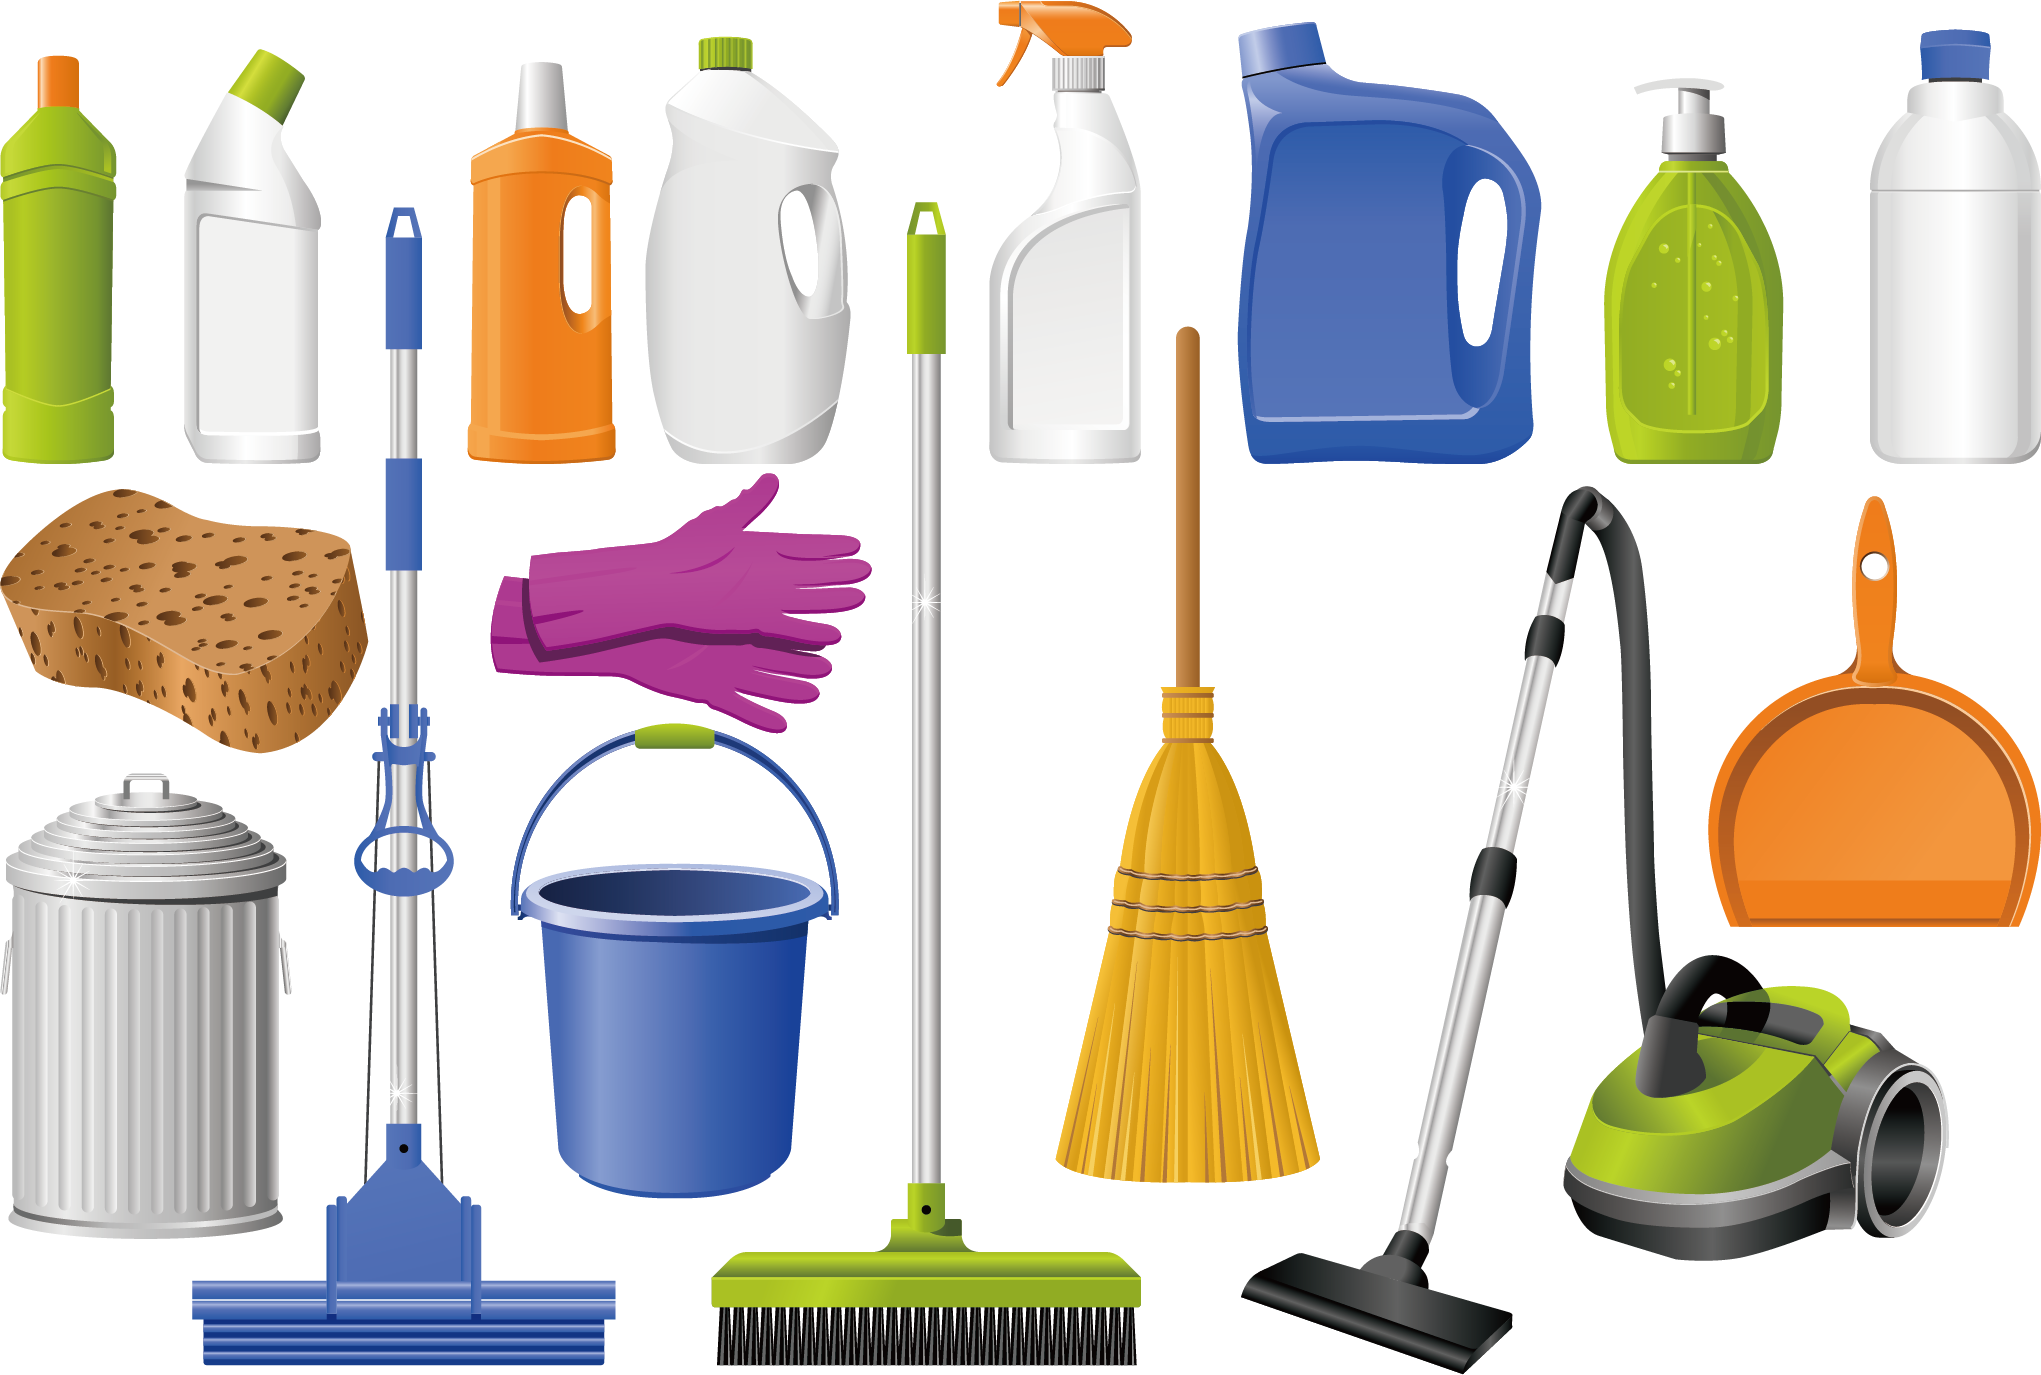 mop clipart house cleaning tools